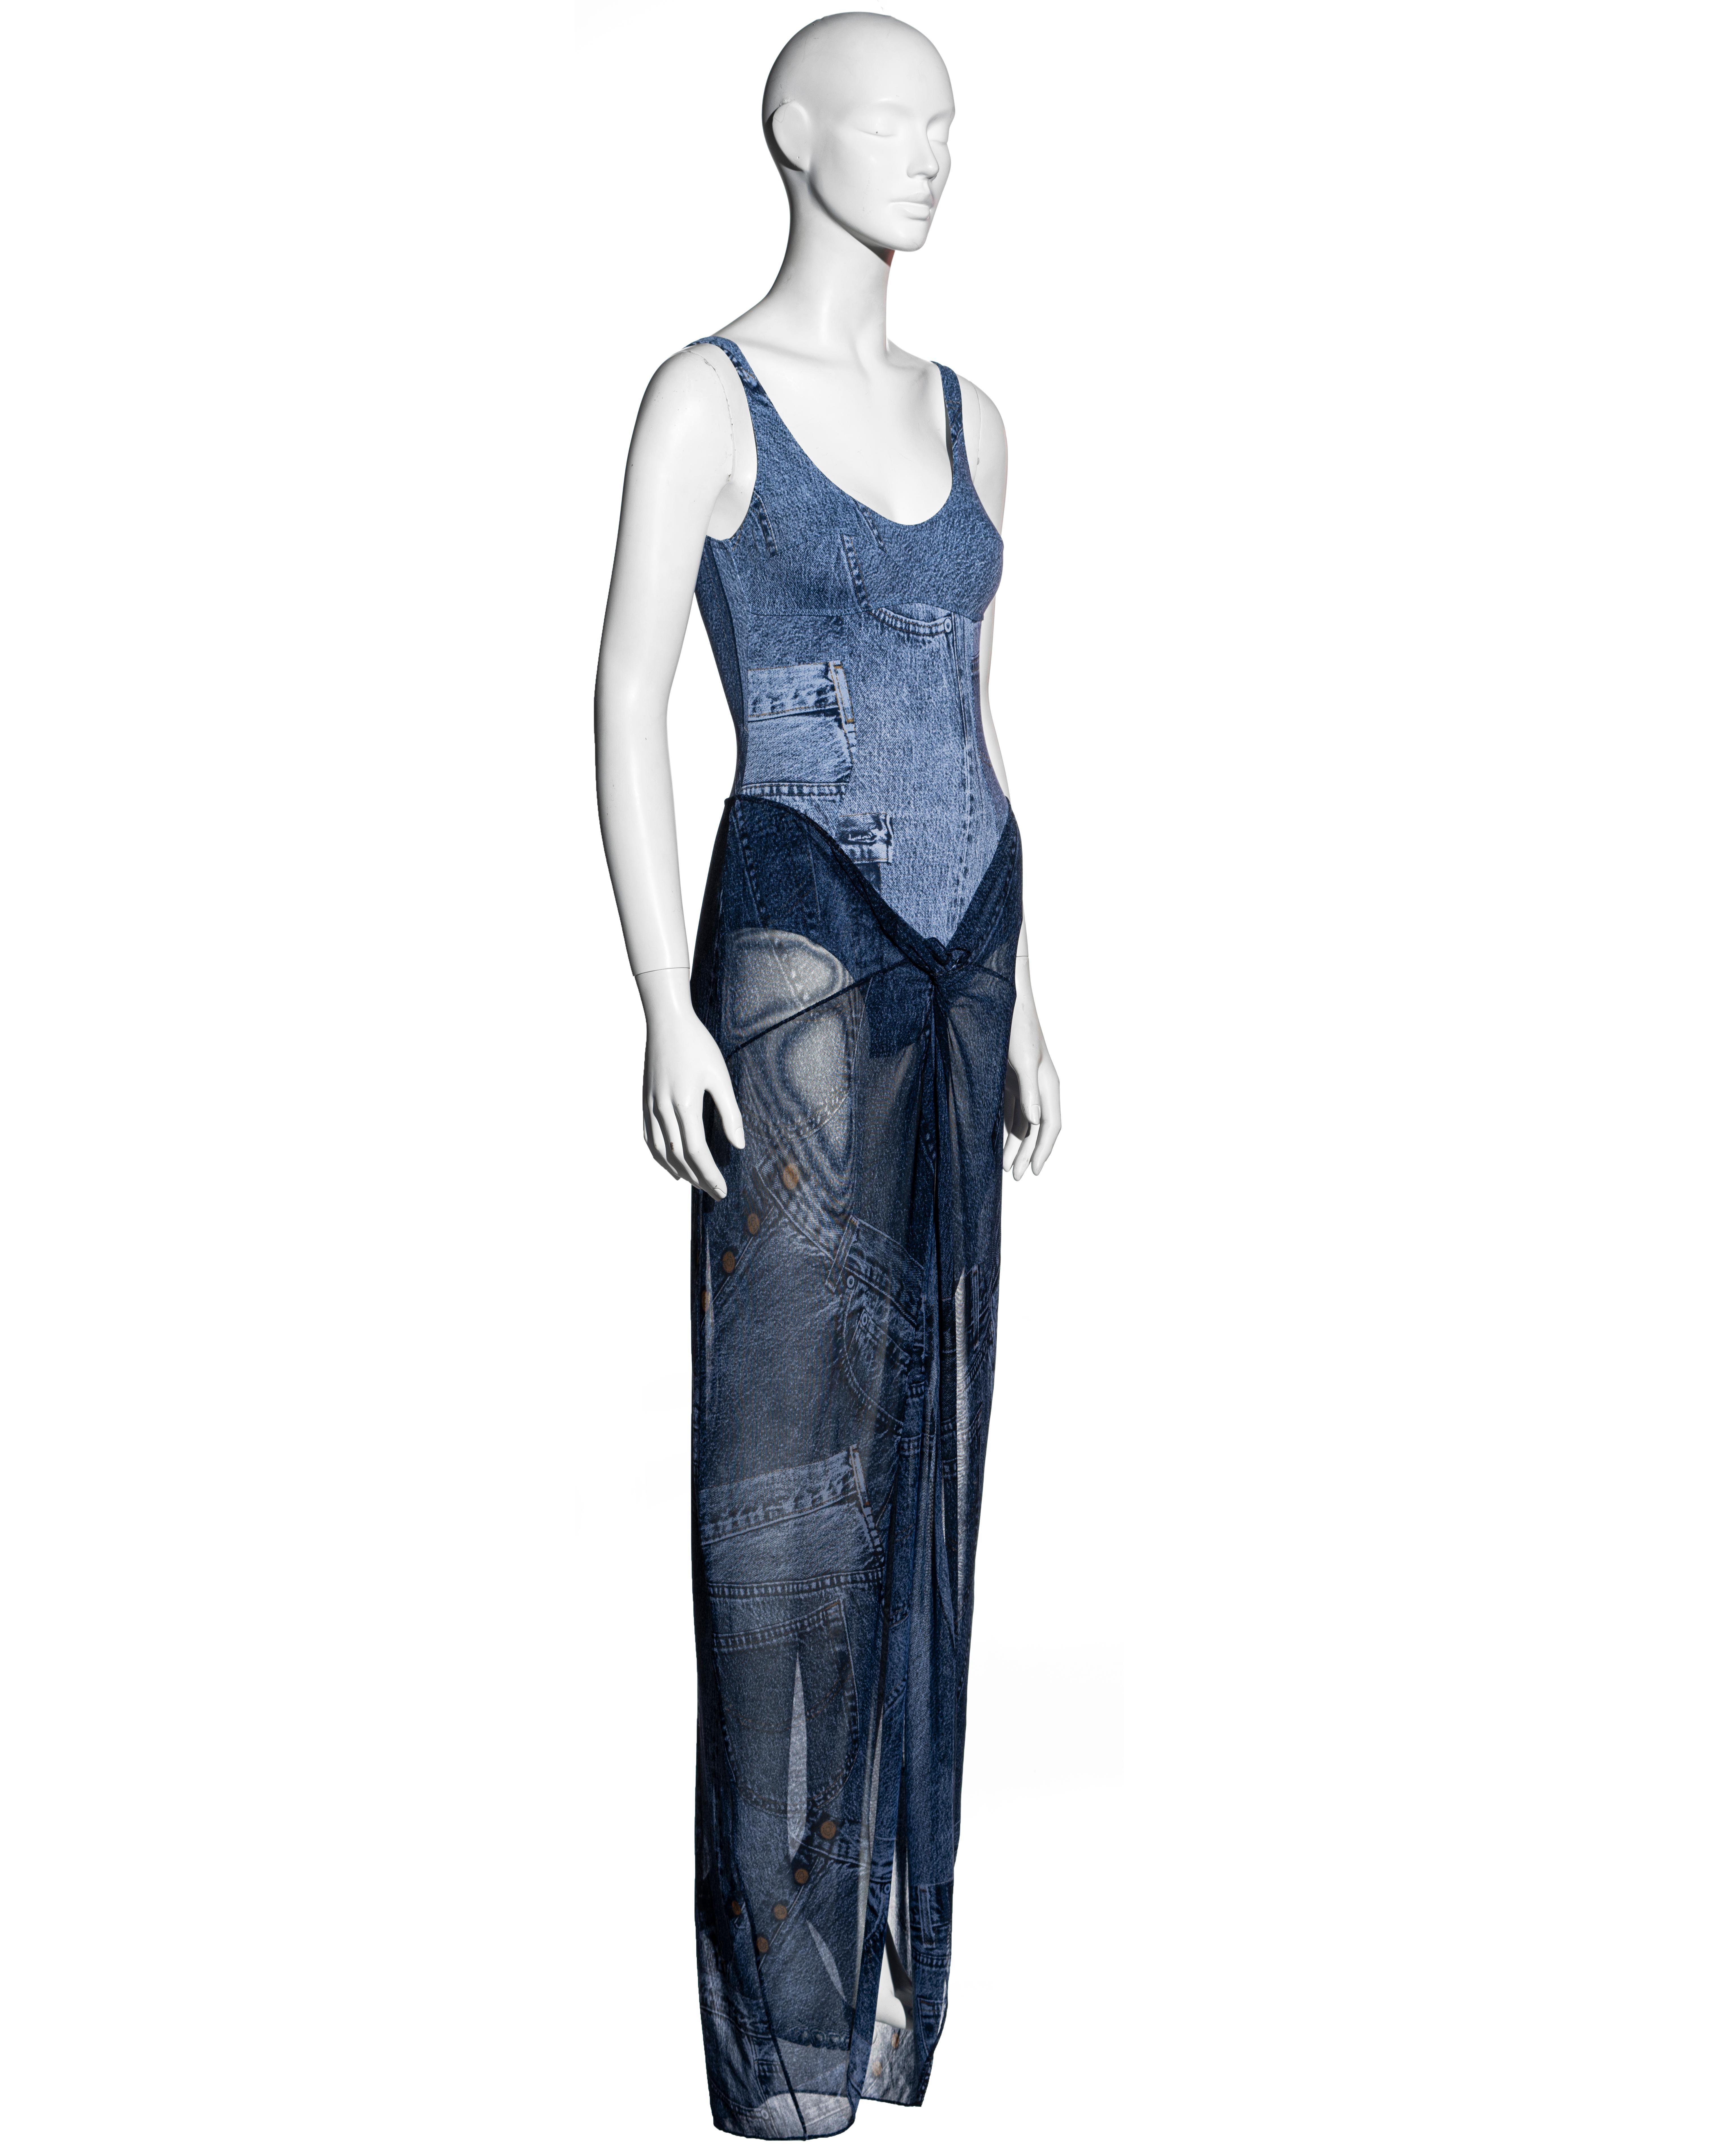 ▪ Christian Dior Trompe-l'œil denim printed bodysuit and maxi skirt set
▪ Designed by John Galliano
▪ Lycra bodysuit with gold 'CD' hardware
▪ Sarong style maxi skirt with knot detail at center-front 
▪ FR 36 - UK 8 
▪ Spring-Summer 2002